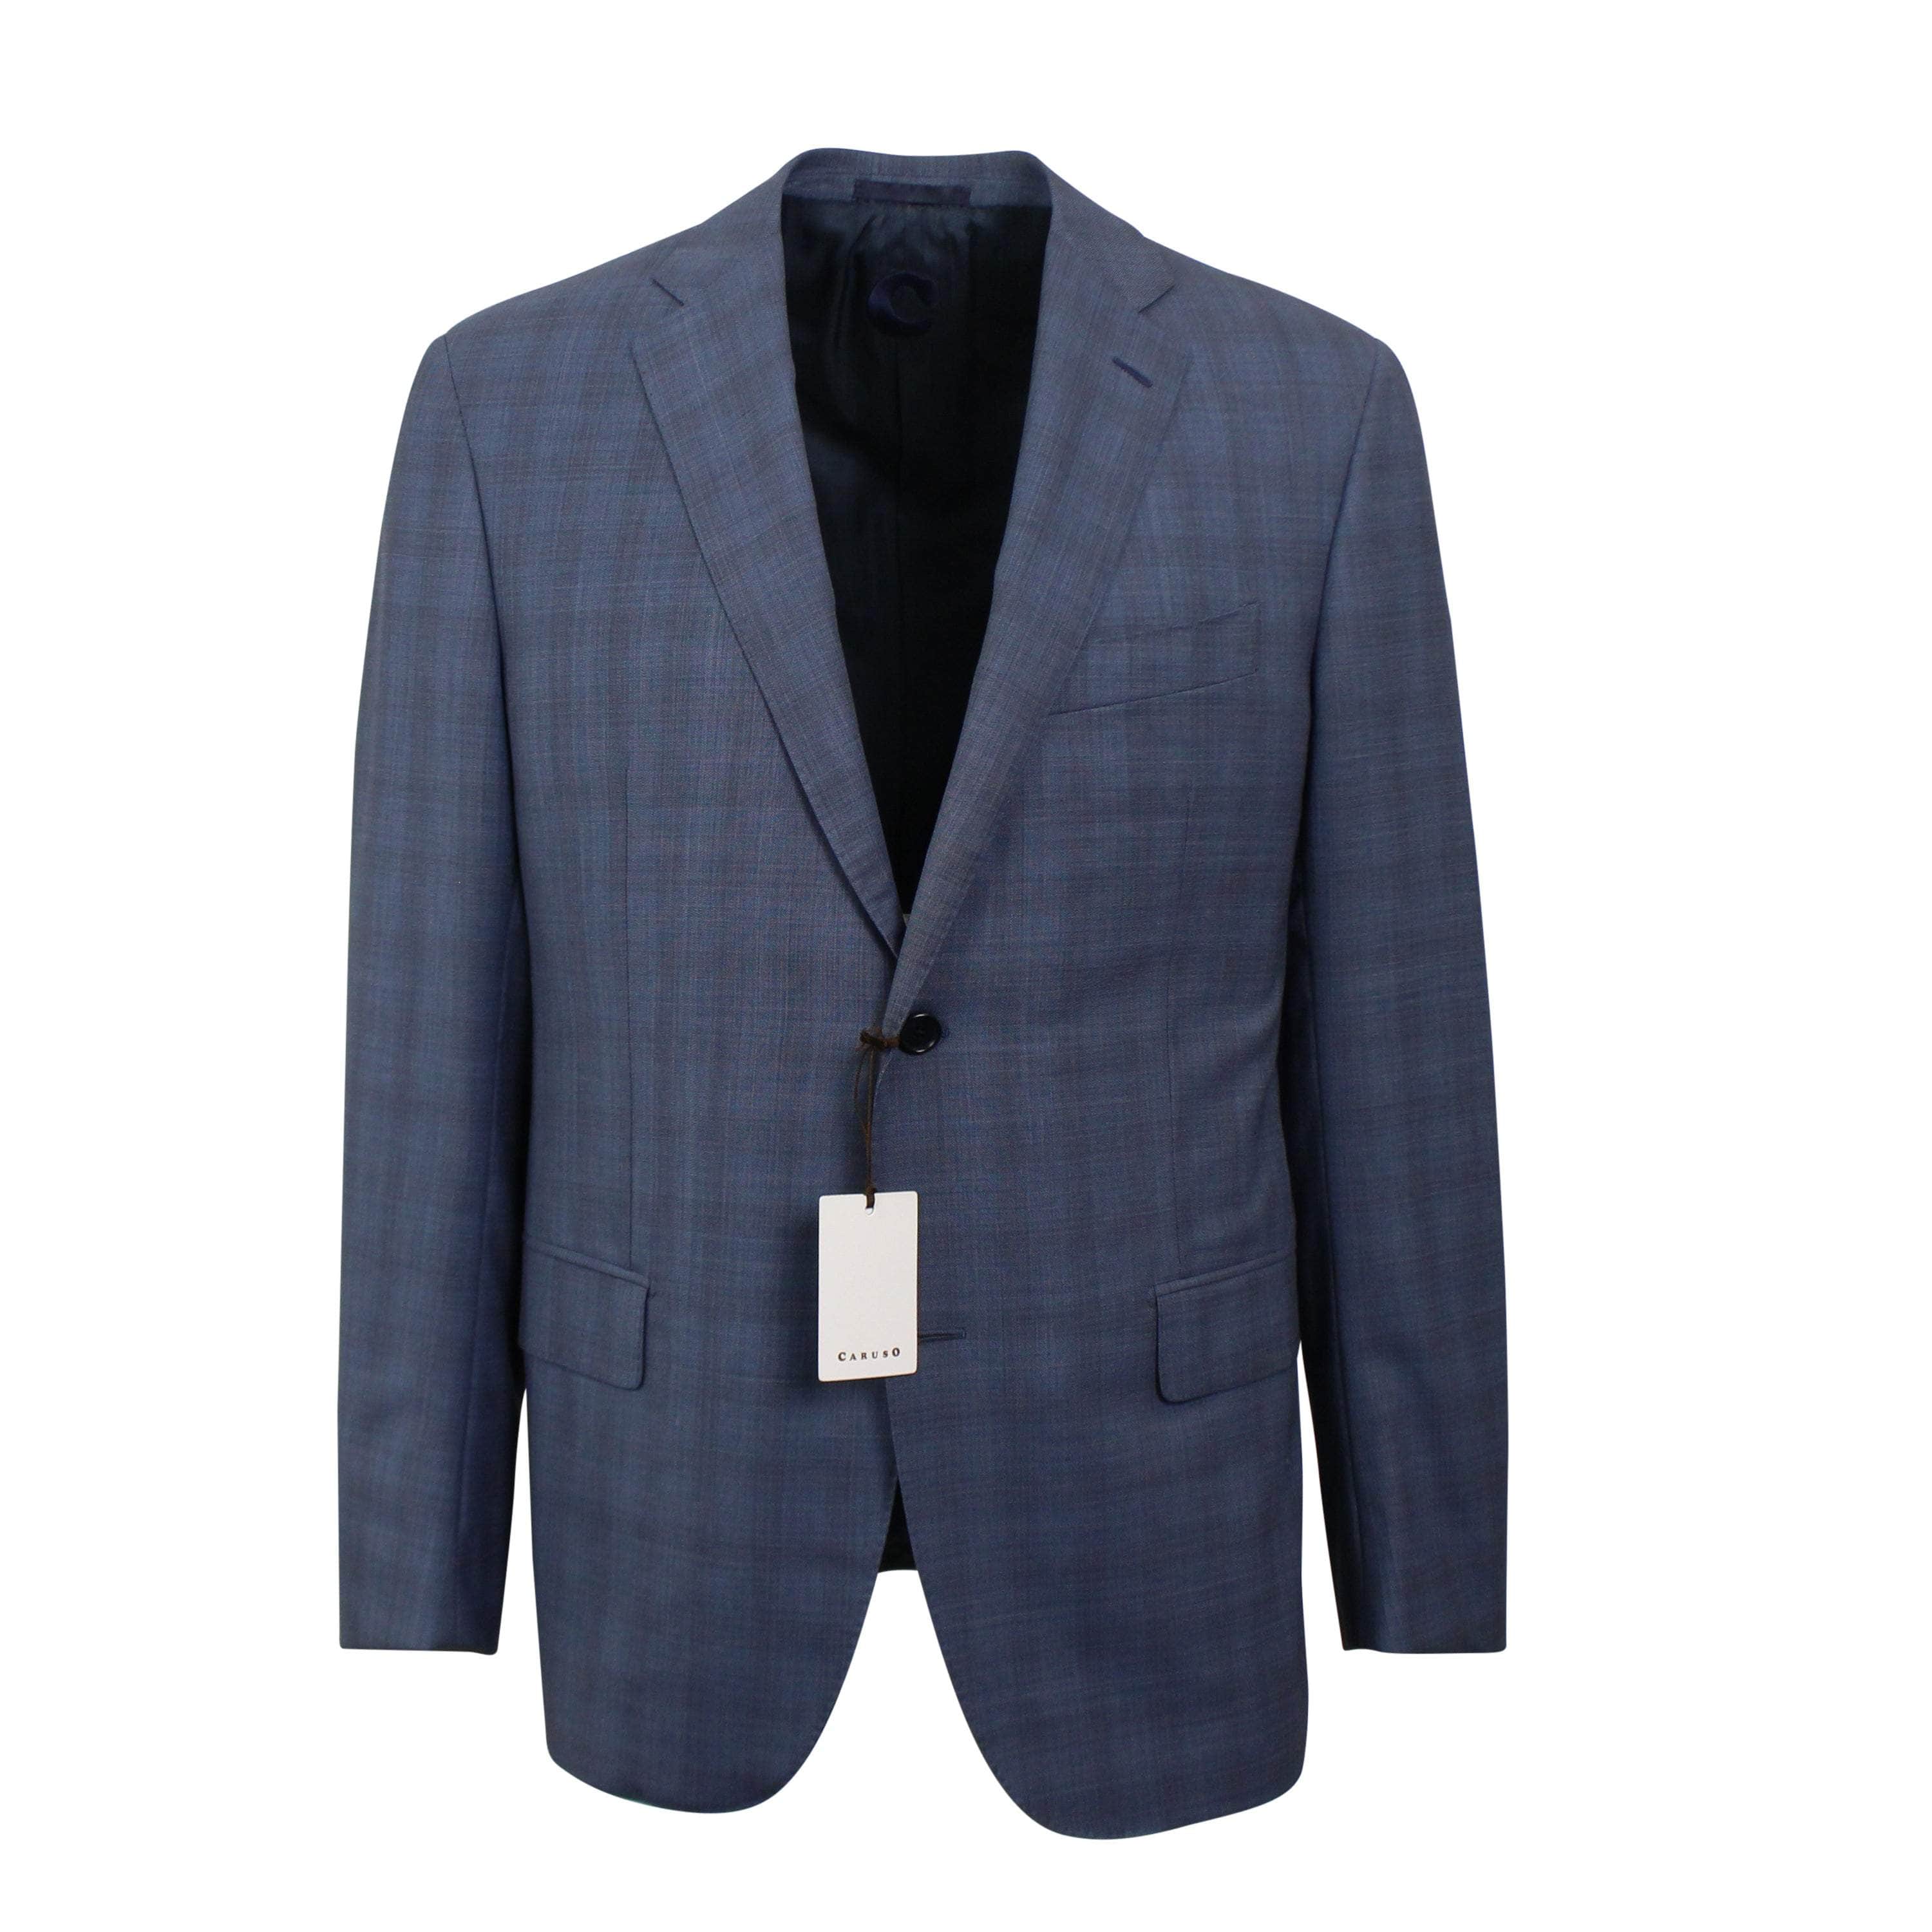 Caruso 750-1000, caruso, channelenable-all, chicmi, couponcollection, main-clothing, shop375, size-50, Stadium Goods 50 Light Blue Single Breasted Wool Suit 7R CRS-XTPS-0192/50 CRS-XTPS-0192/50